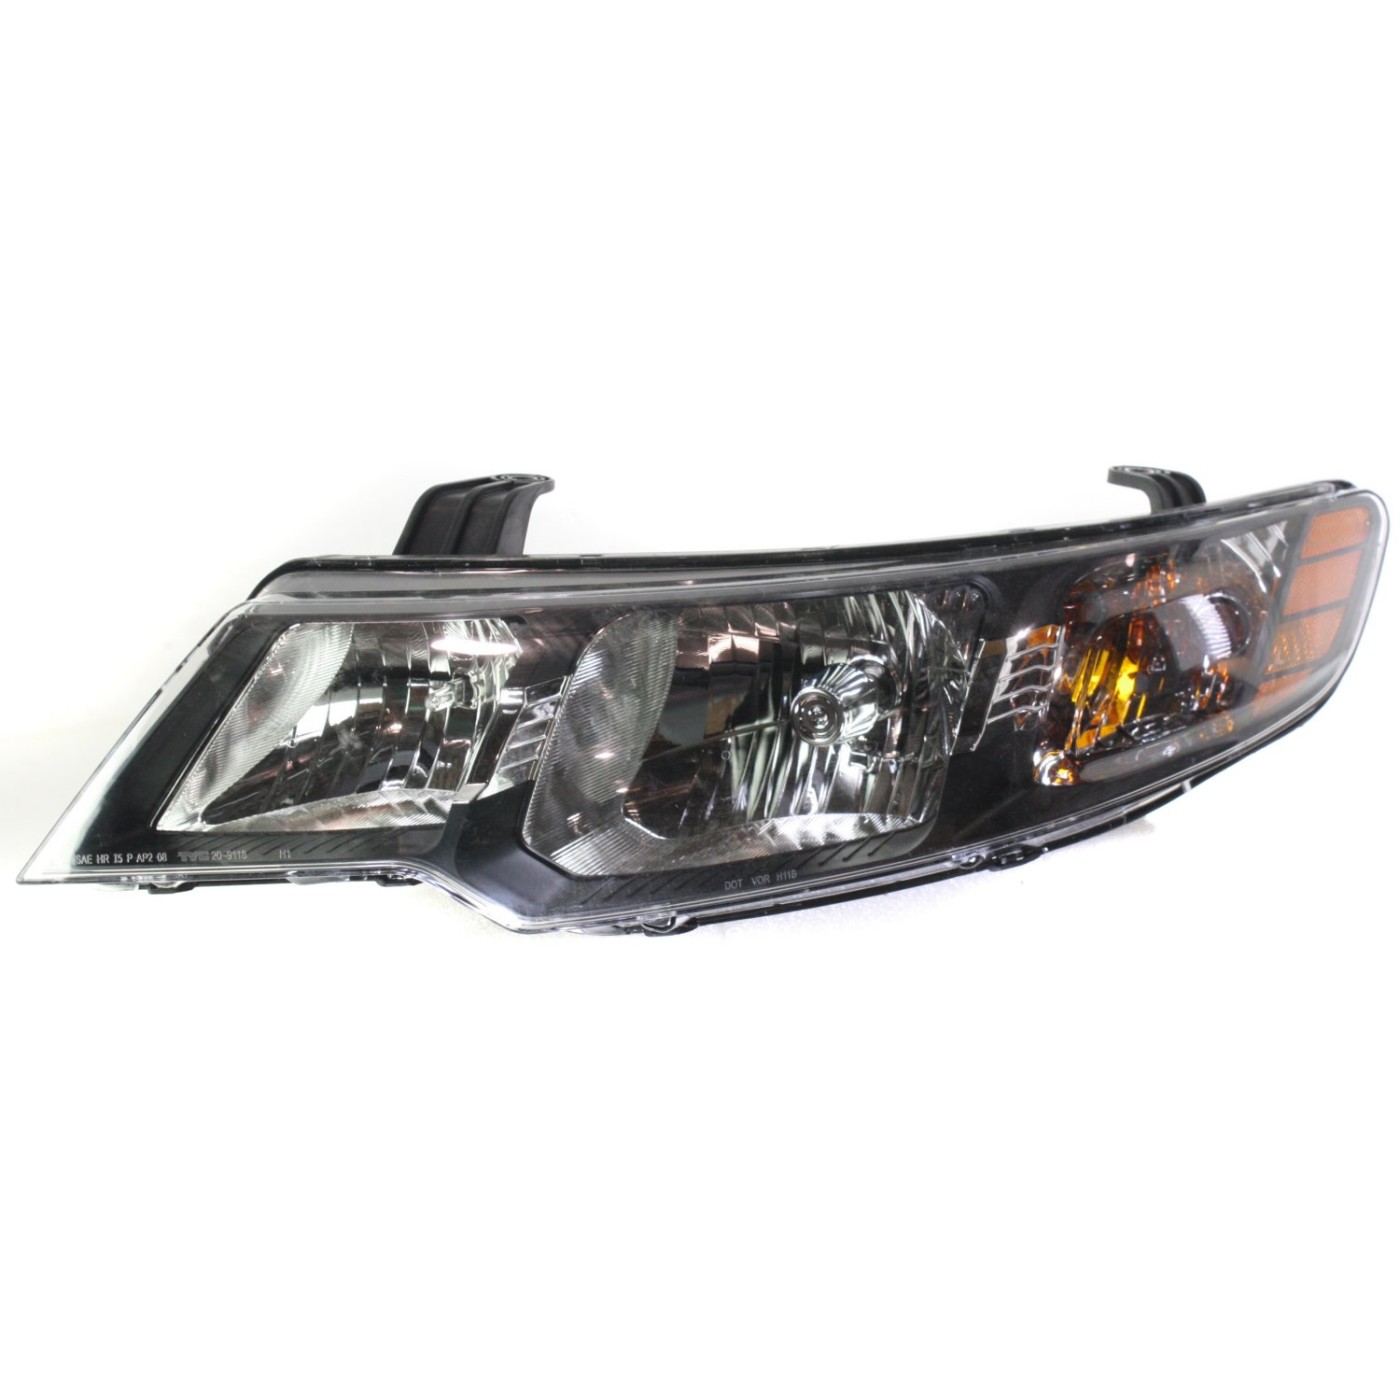 Headlight Set For 2010-2011 Kia Forte Left and Right With Bulb 2Pc | eBay